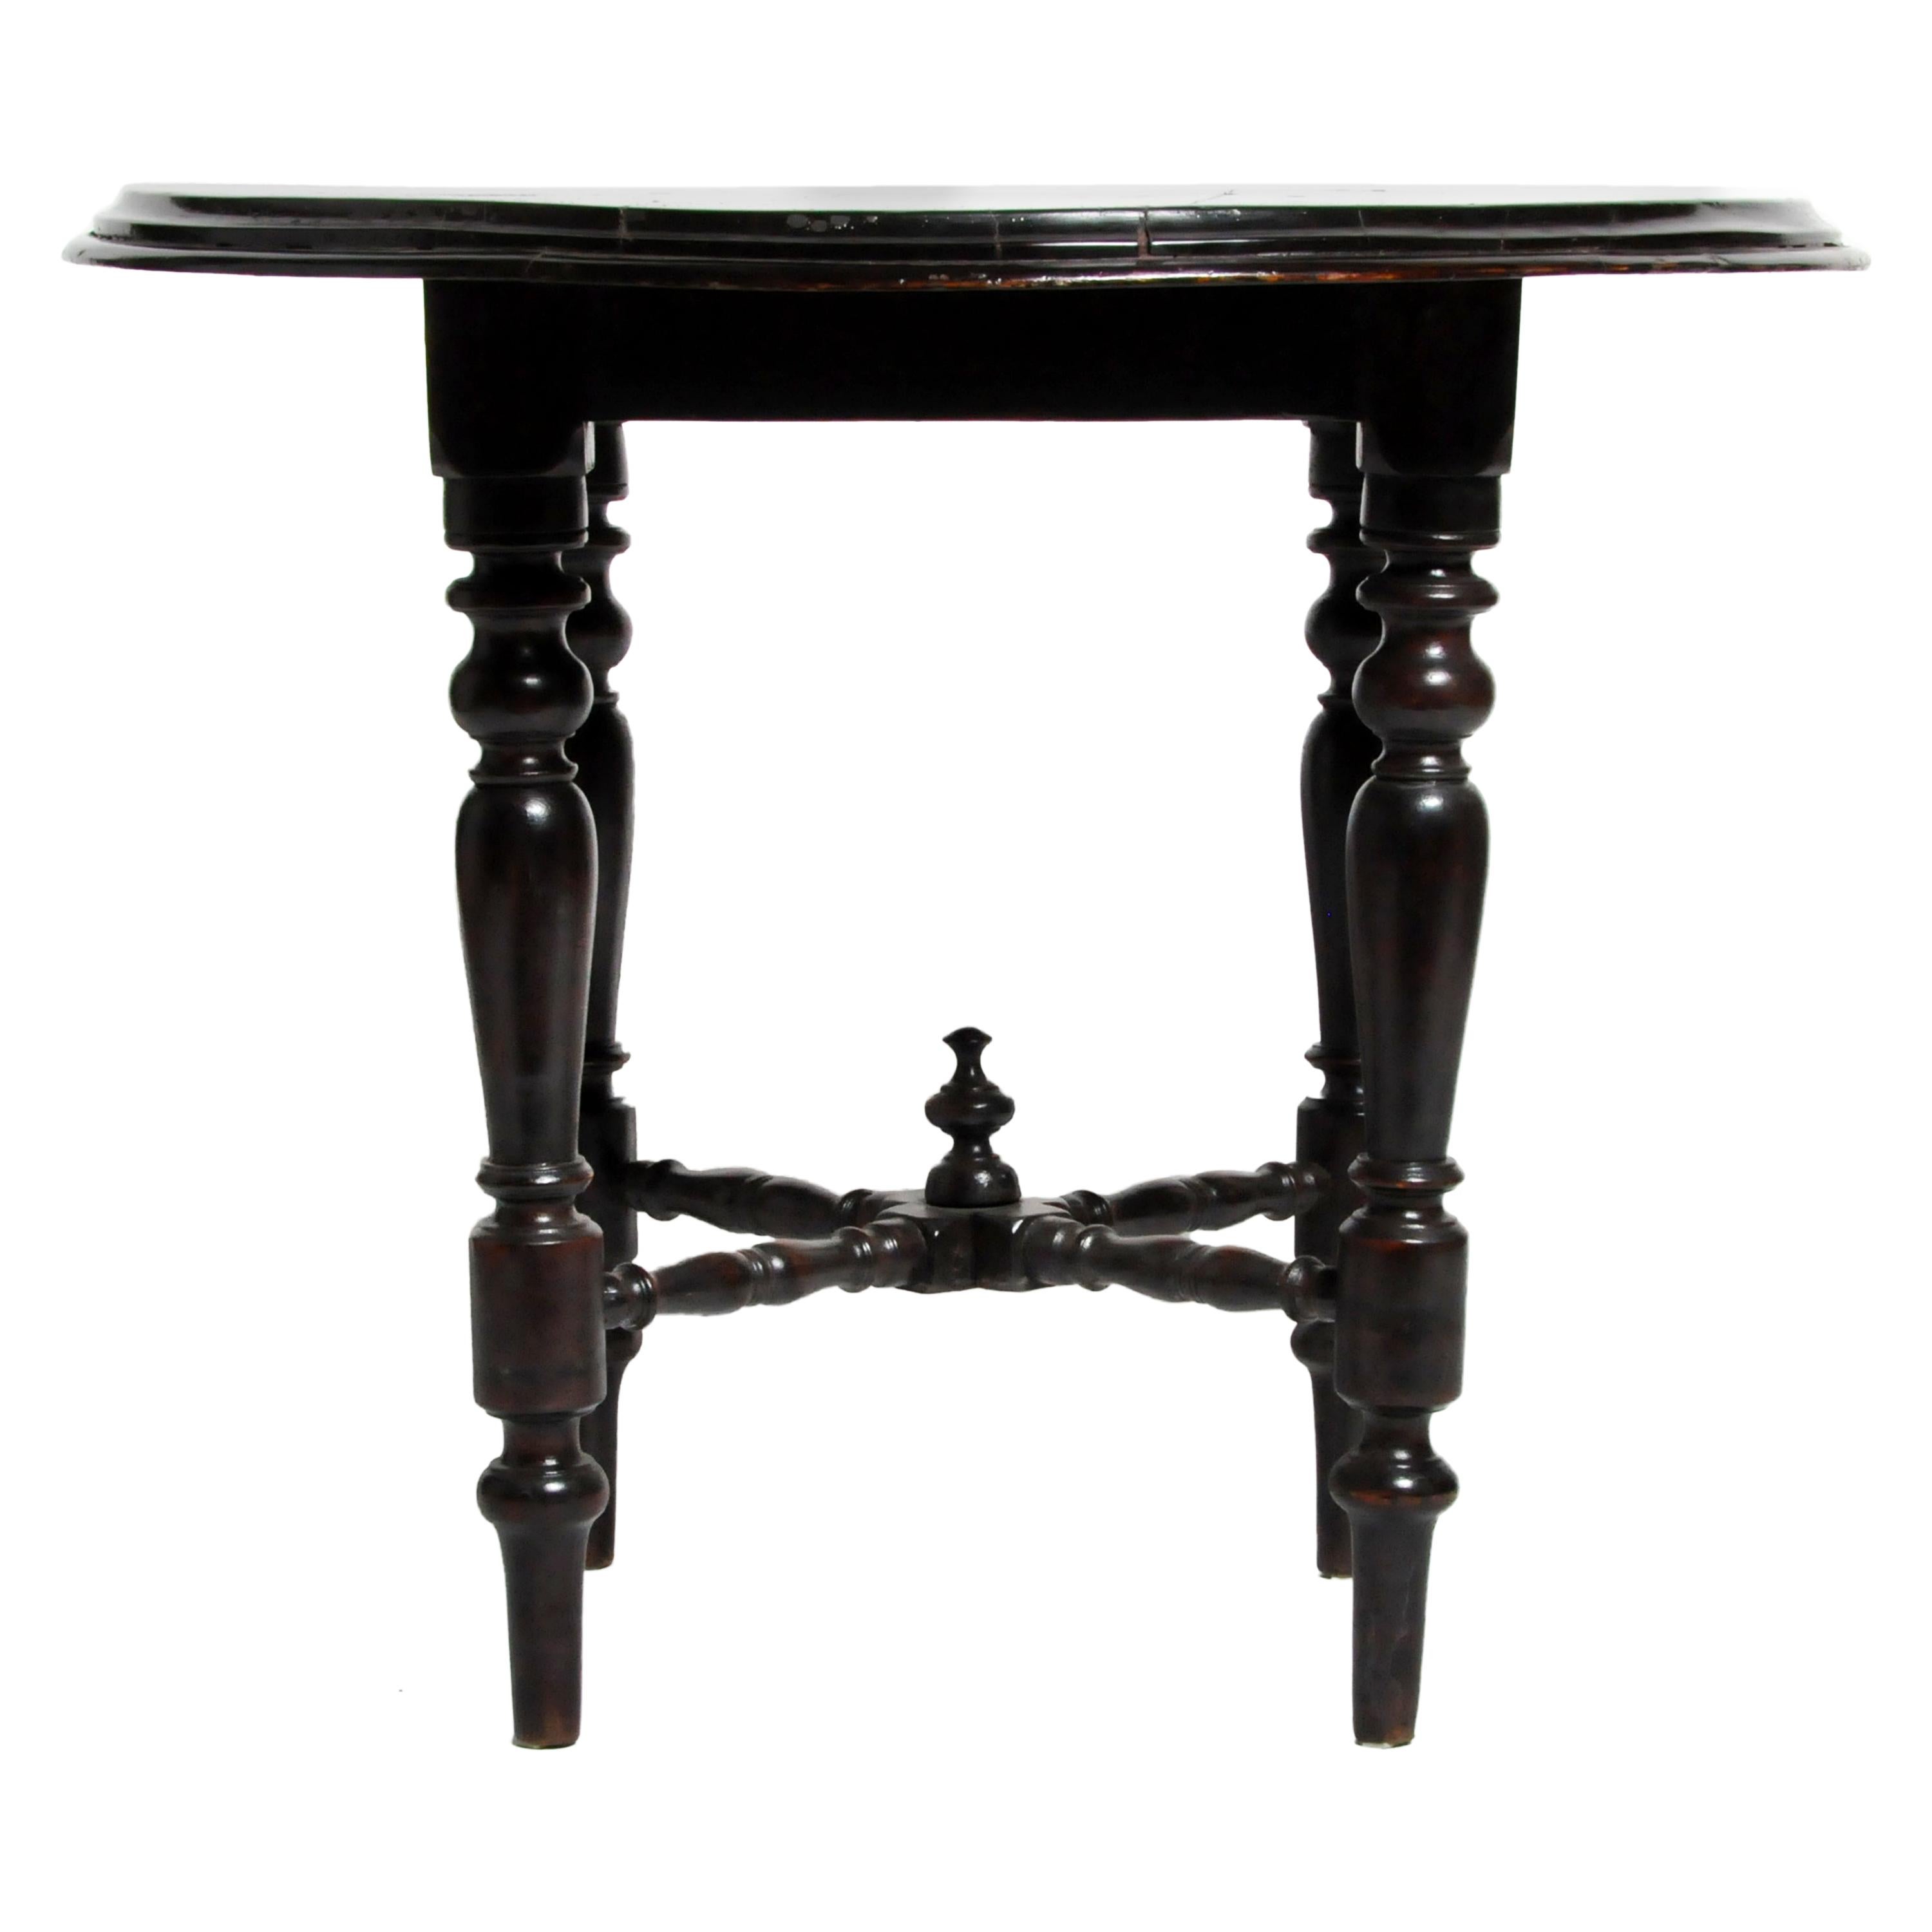 British Colonial Round Table with Turned Legs